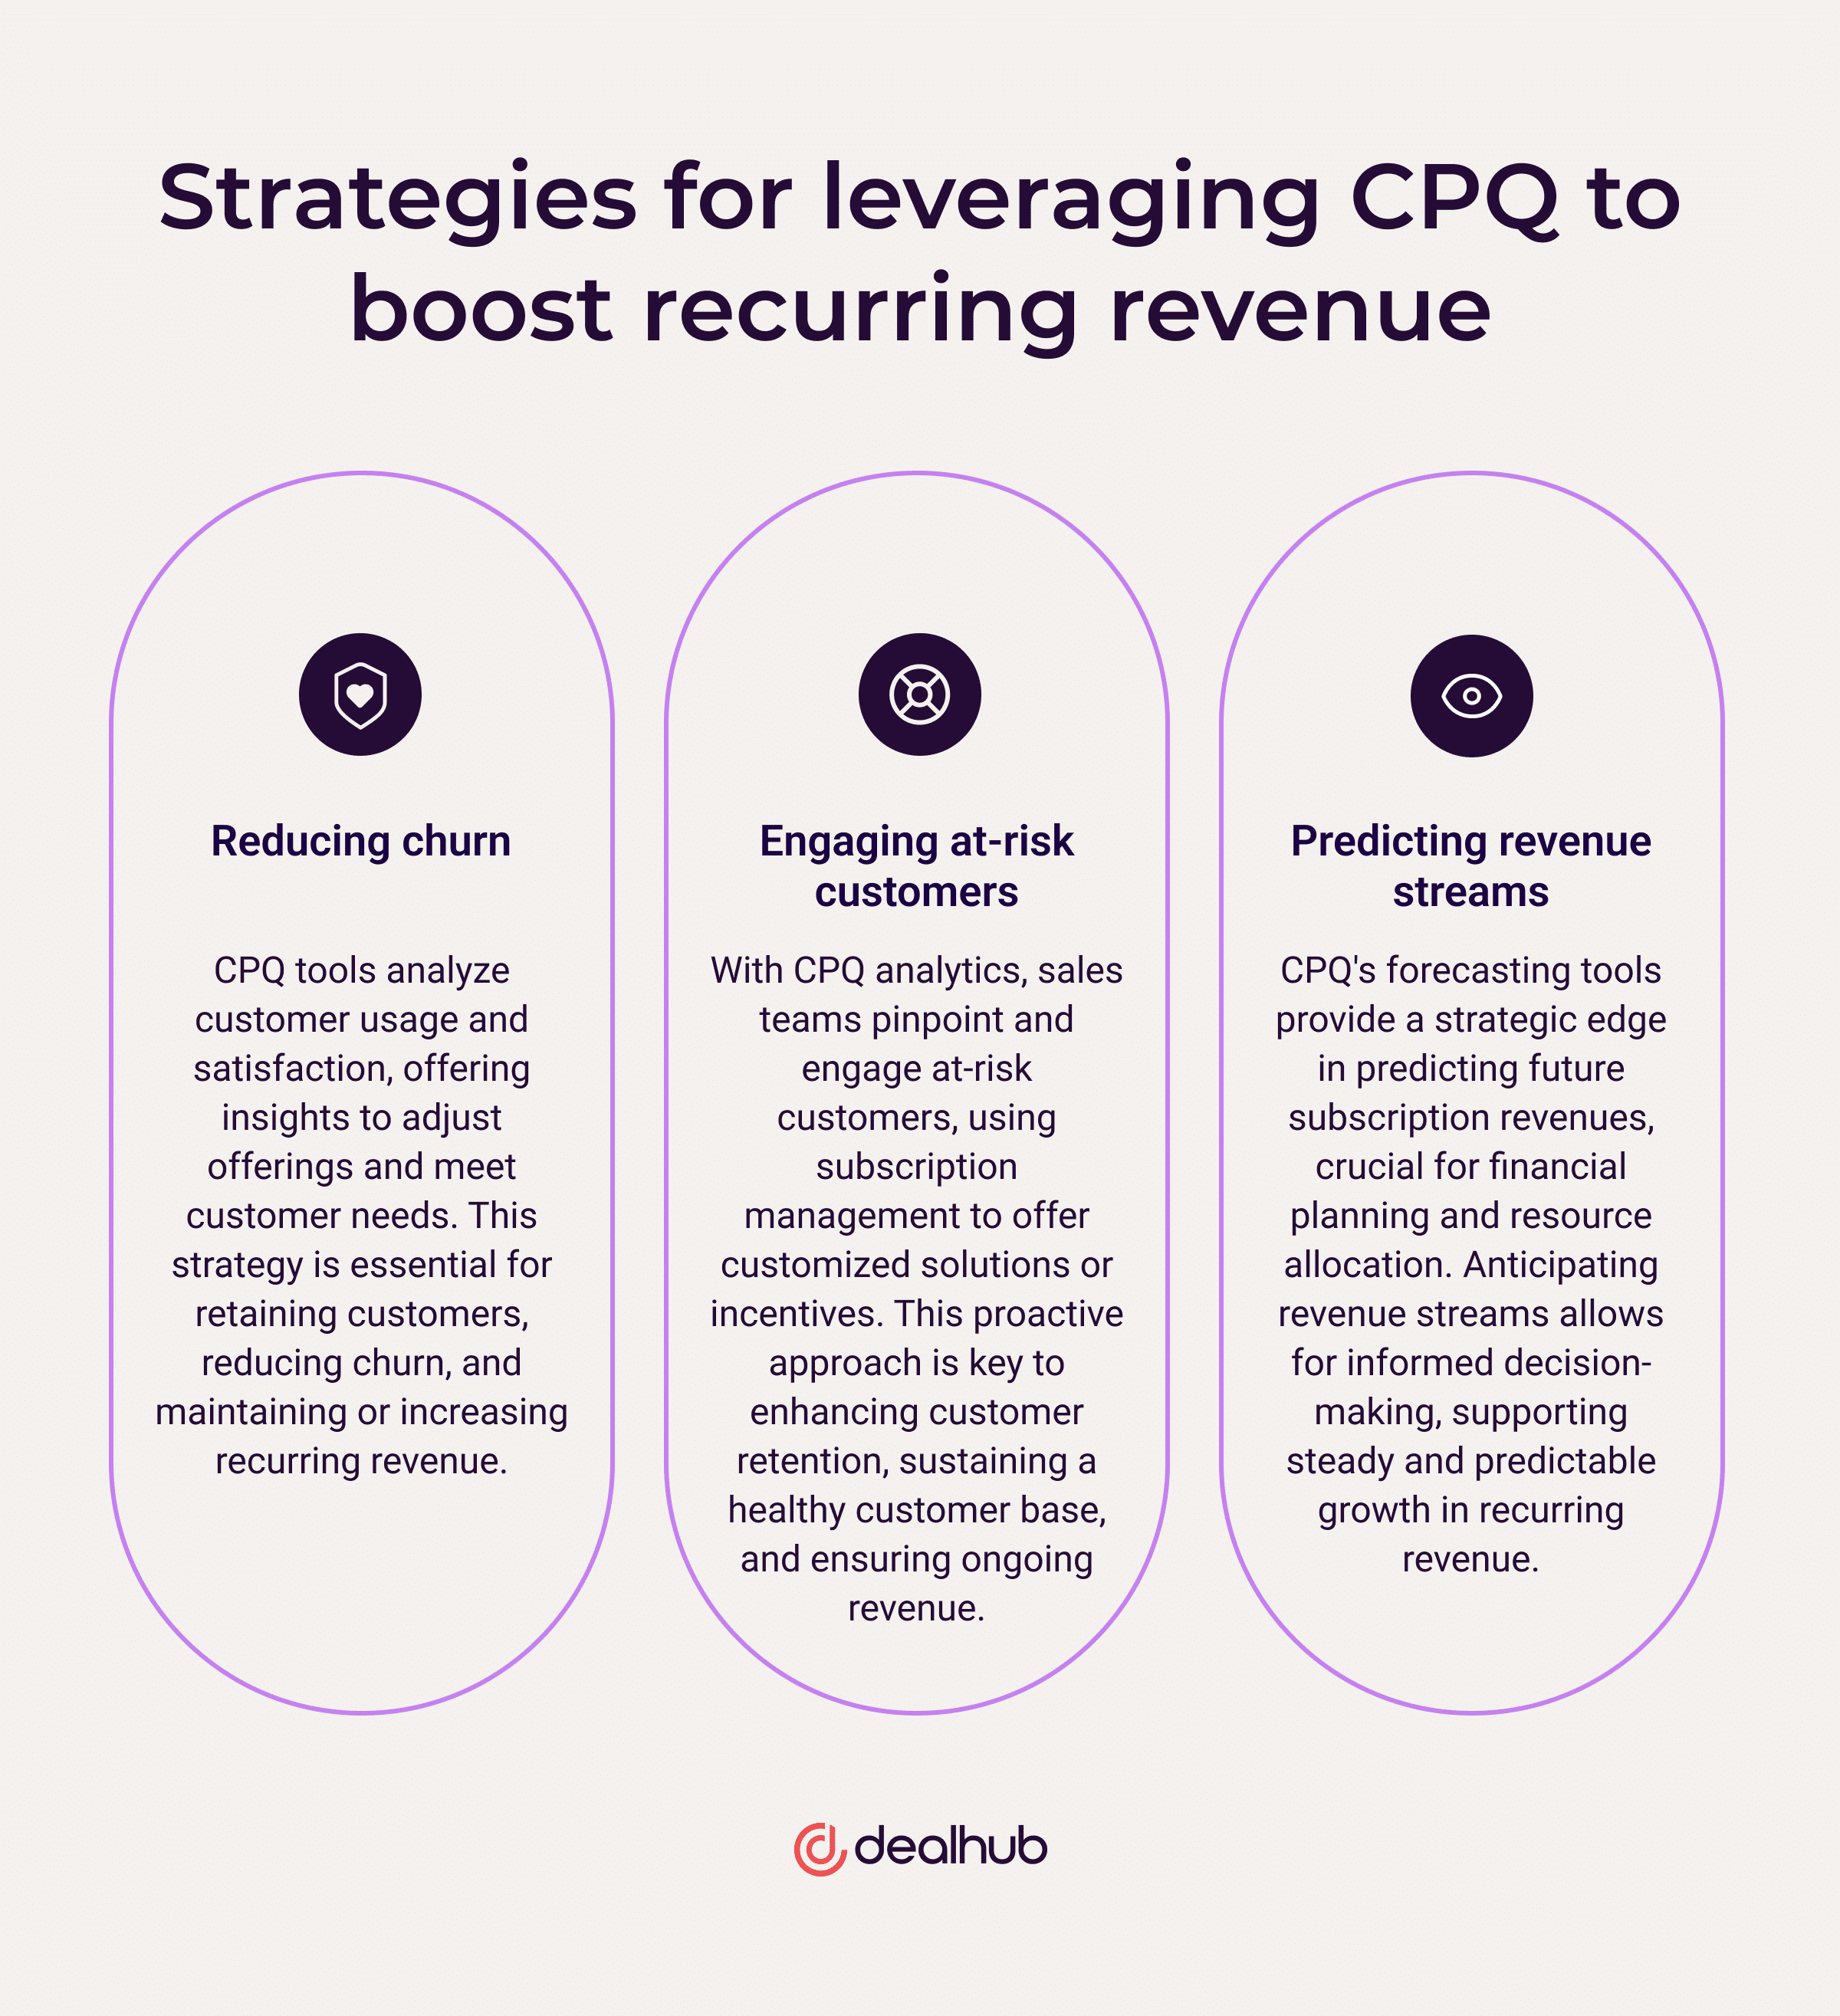 Strategies for leveraging CPQ to boost recurring revenue